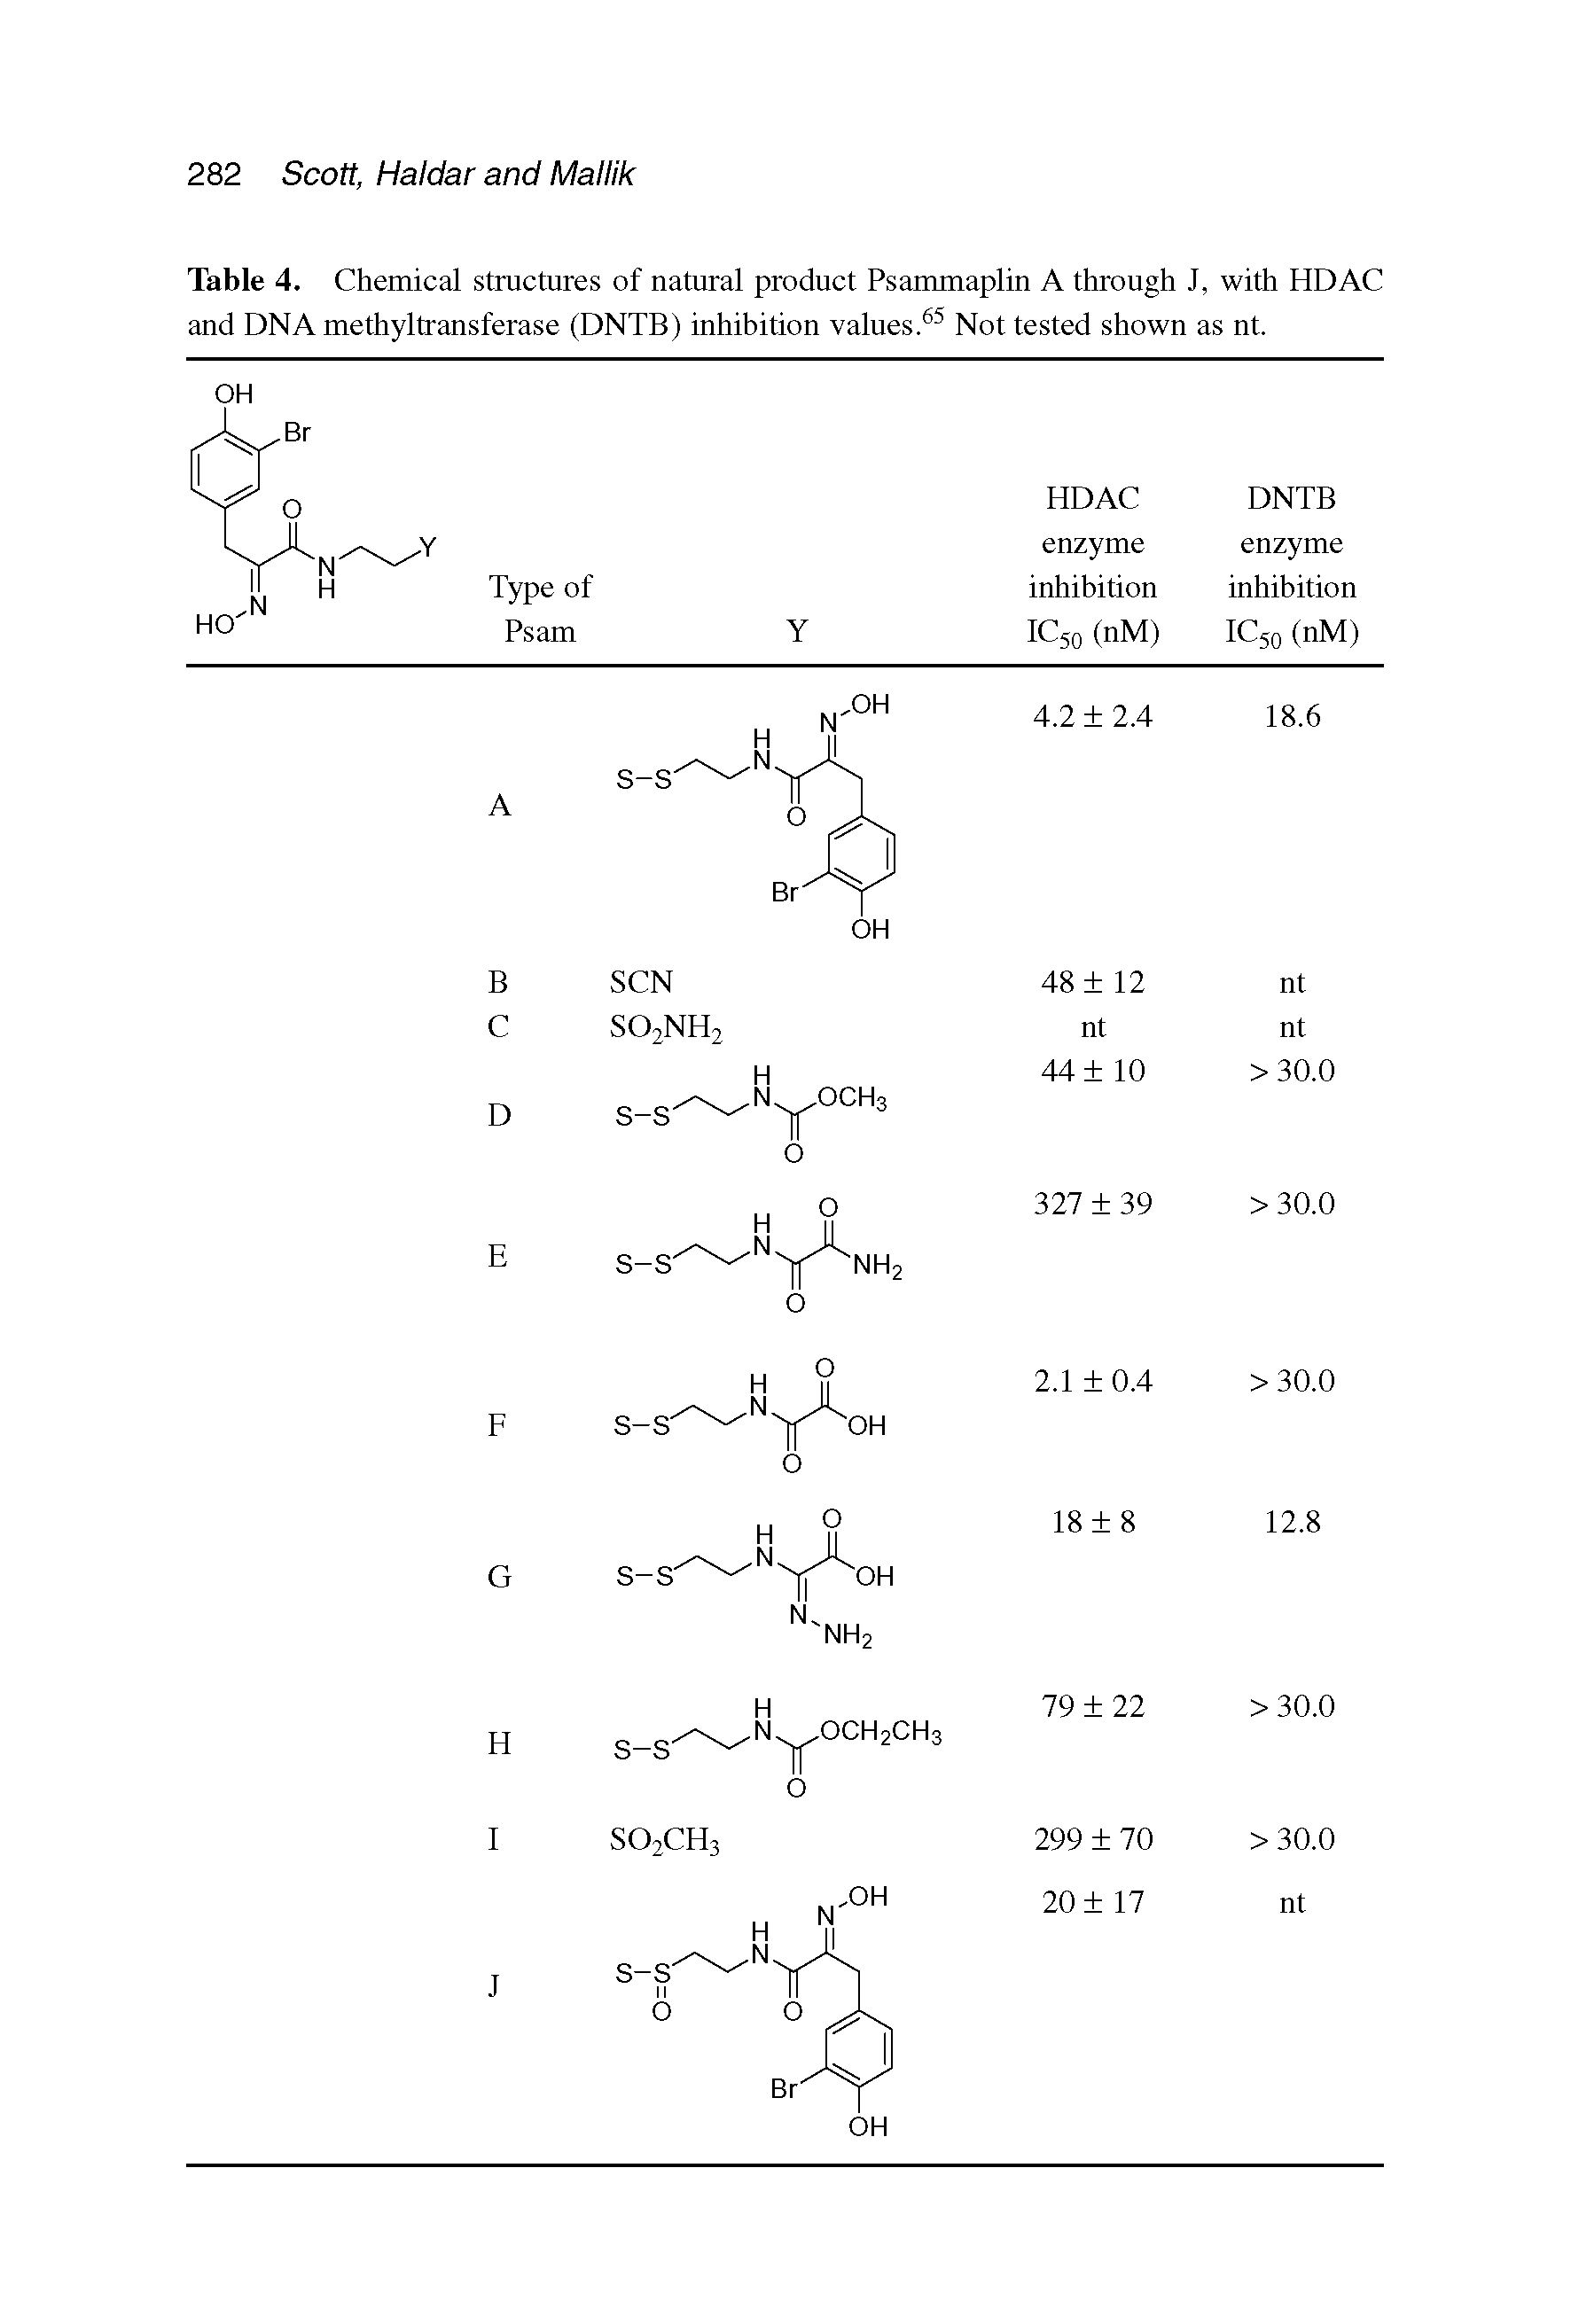 Table 4. Chemical structures of natural product Psammaplin A through J, with HD AC and DNA methyltransferase (DNTB) inhibition values. Not tested shown as nt.